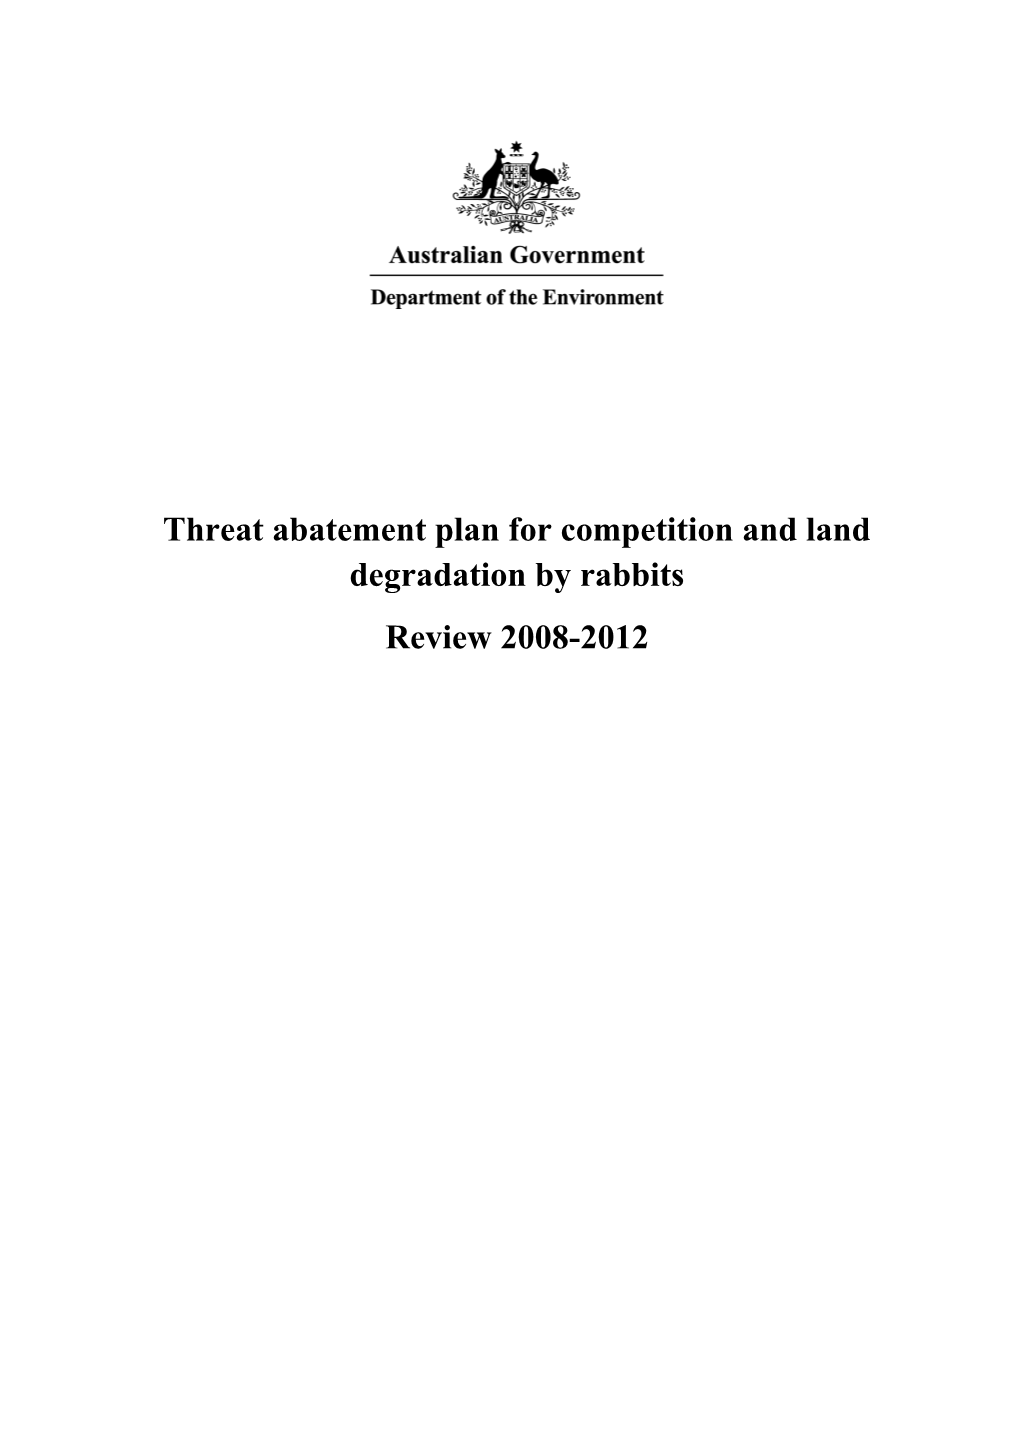 Threat Abatement Plan for Competition and Land Degradation by Rabbits Review 2008-2012